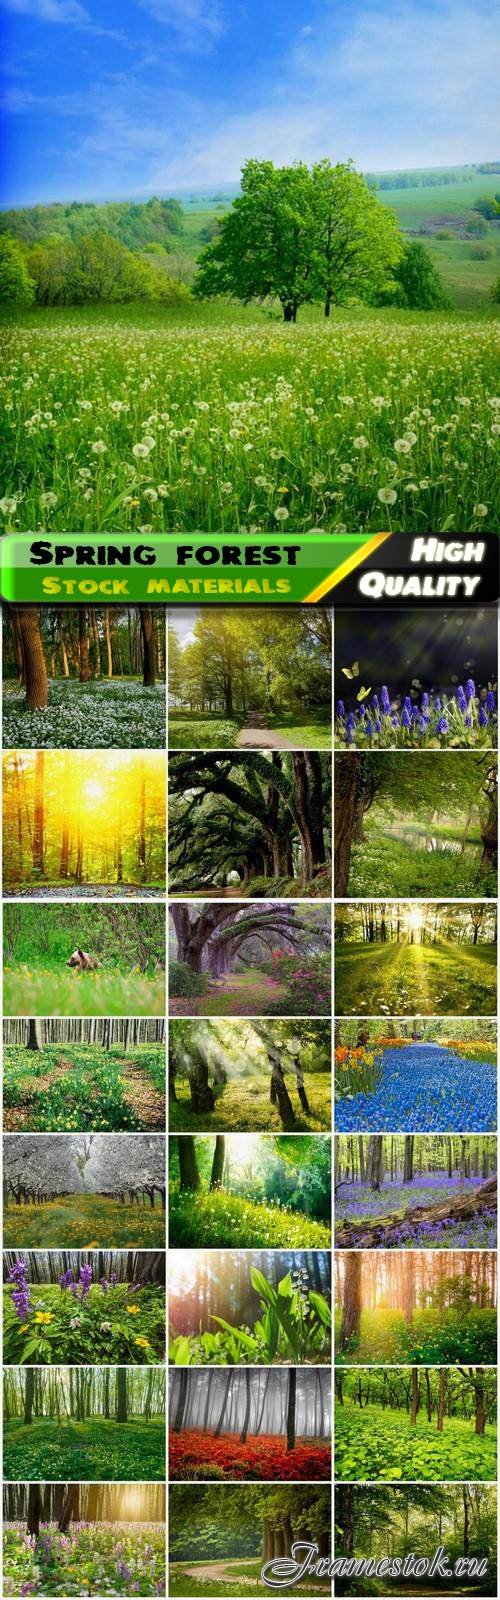 Beautiful nature and landscapes of spring forest - 25 HQ Jpg